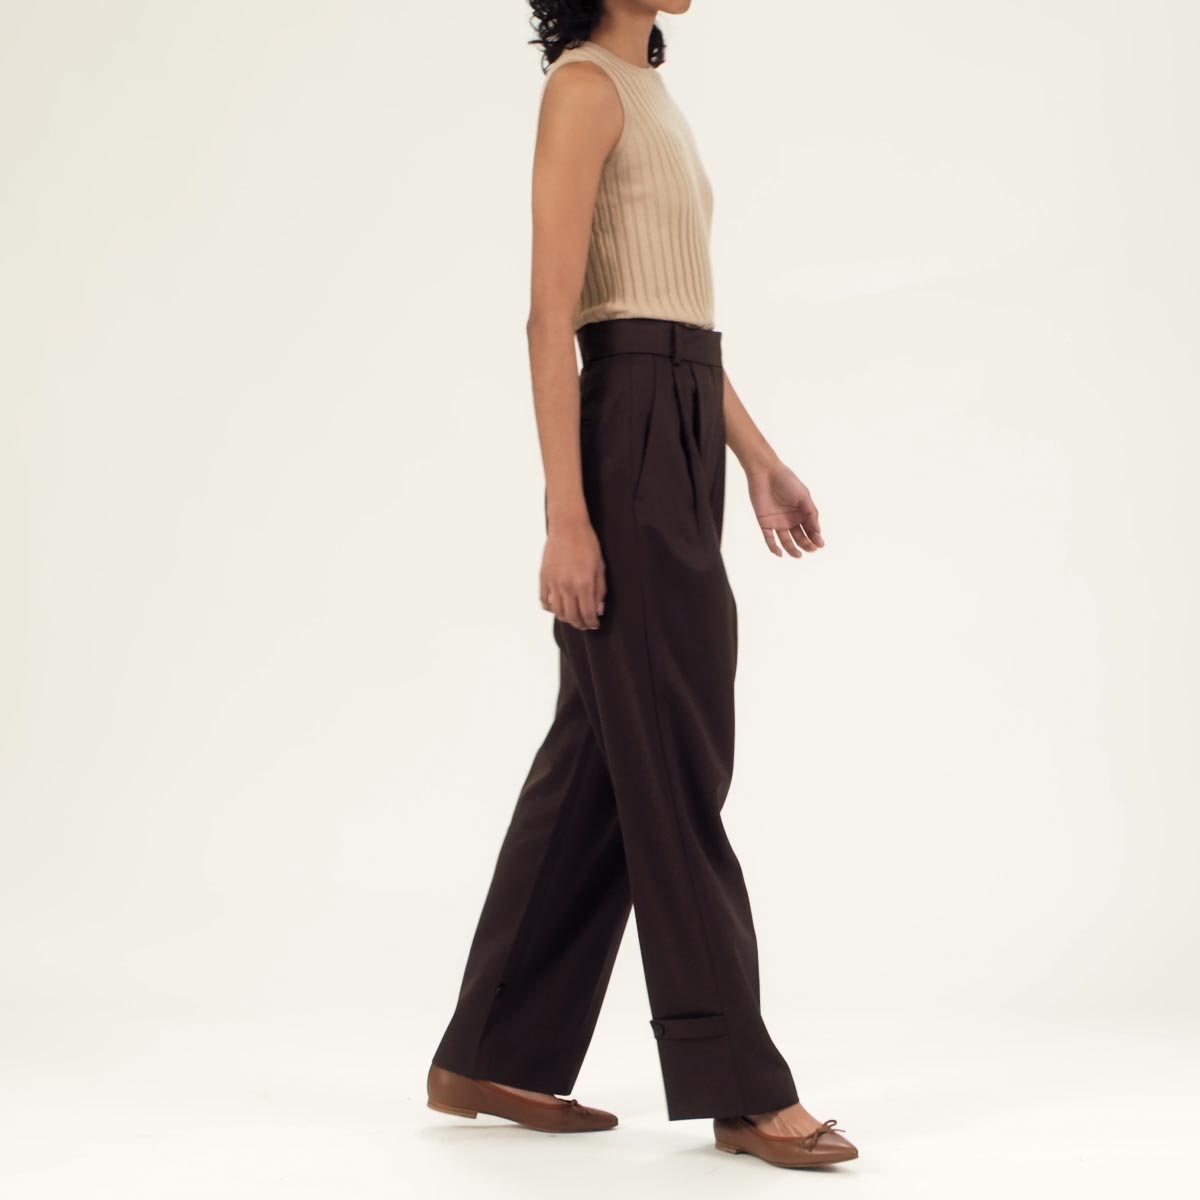 The Pointe in Saddle Nappa shown on model styled with chocolate brown dress pants and a beige sleeveless blouse.